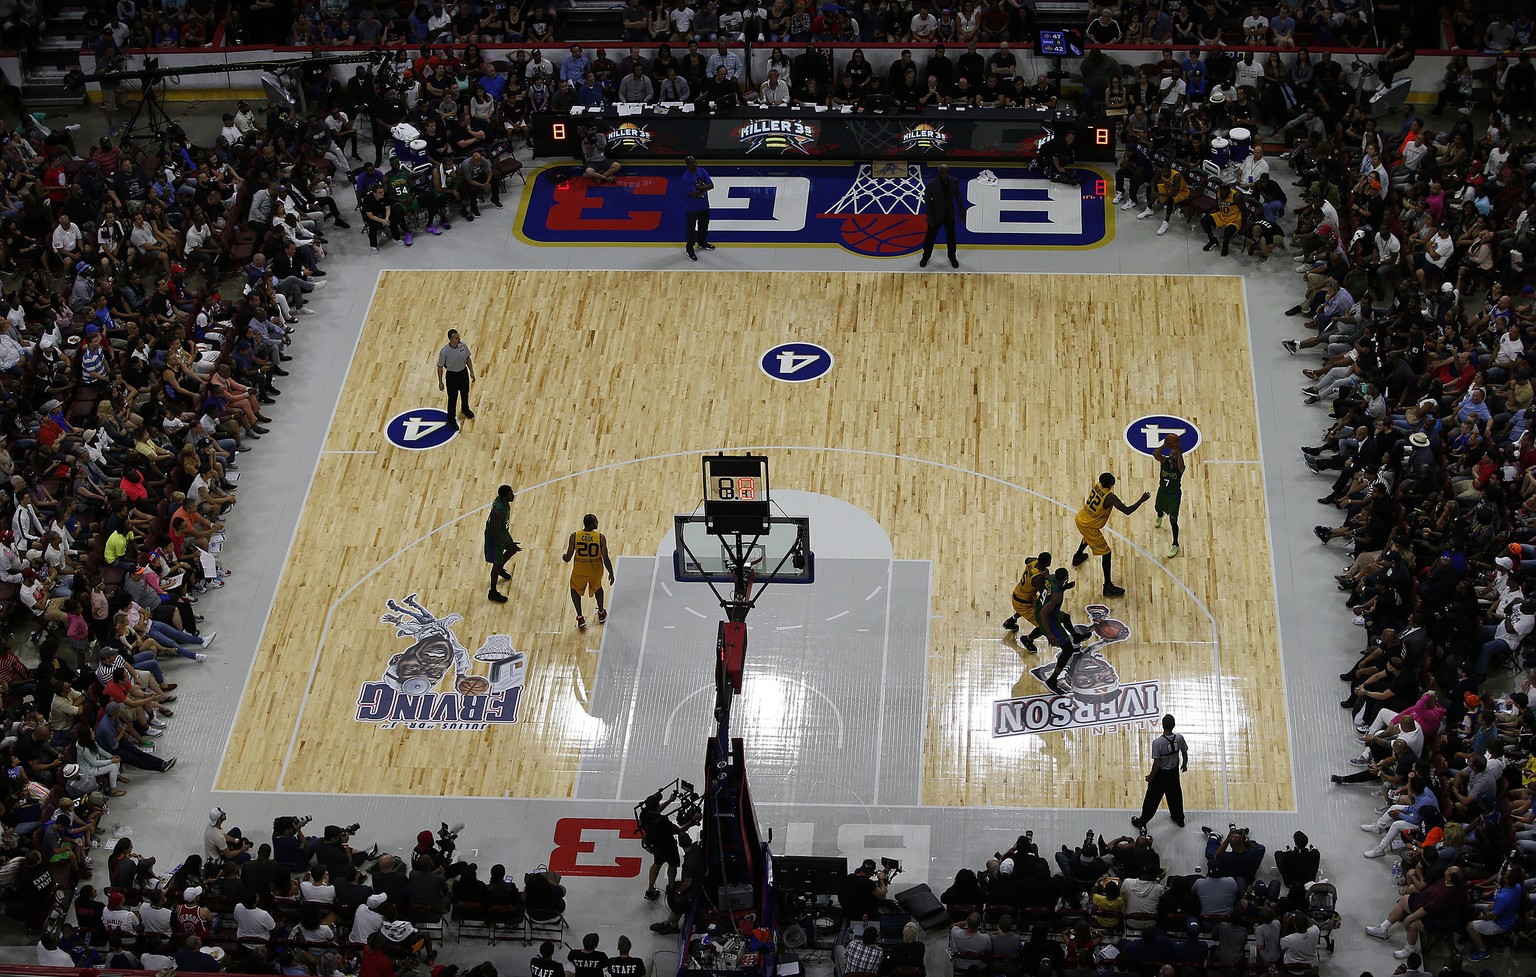 FILE - In this July 16, 2017, file photo, the Killer 3&#039;s play the 3 Headed Monsters during a BIG3 basketball game in Philadelphia, Pa. Big3 made it to a third season, barnstorming this summer fro ...